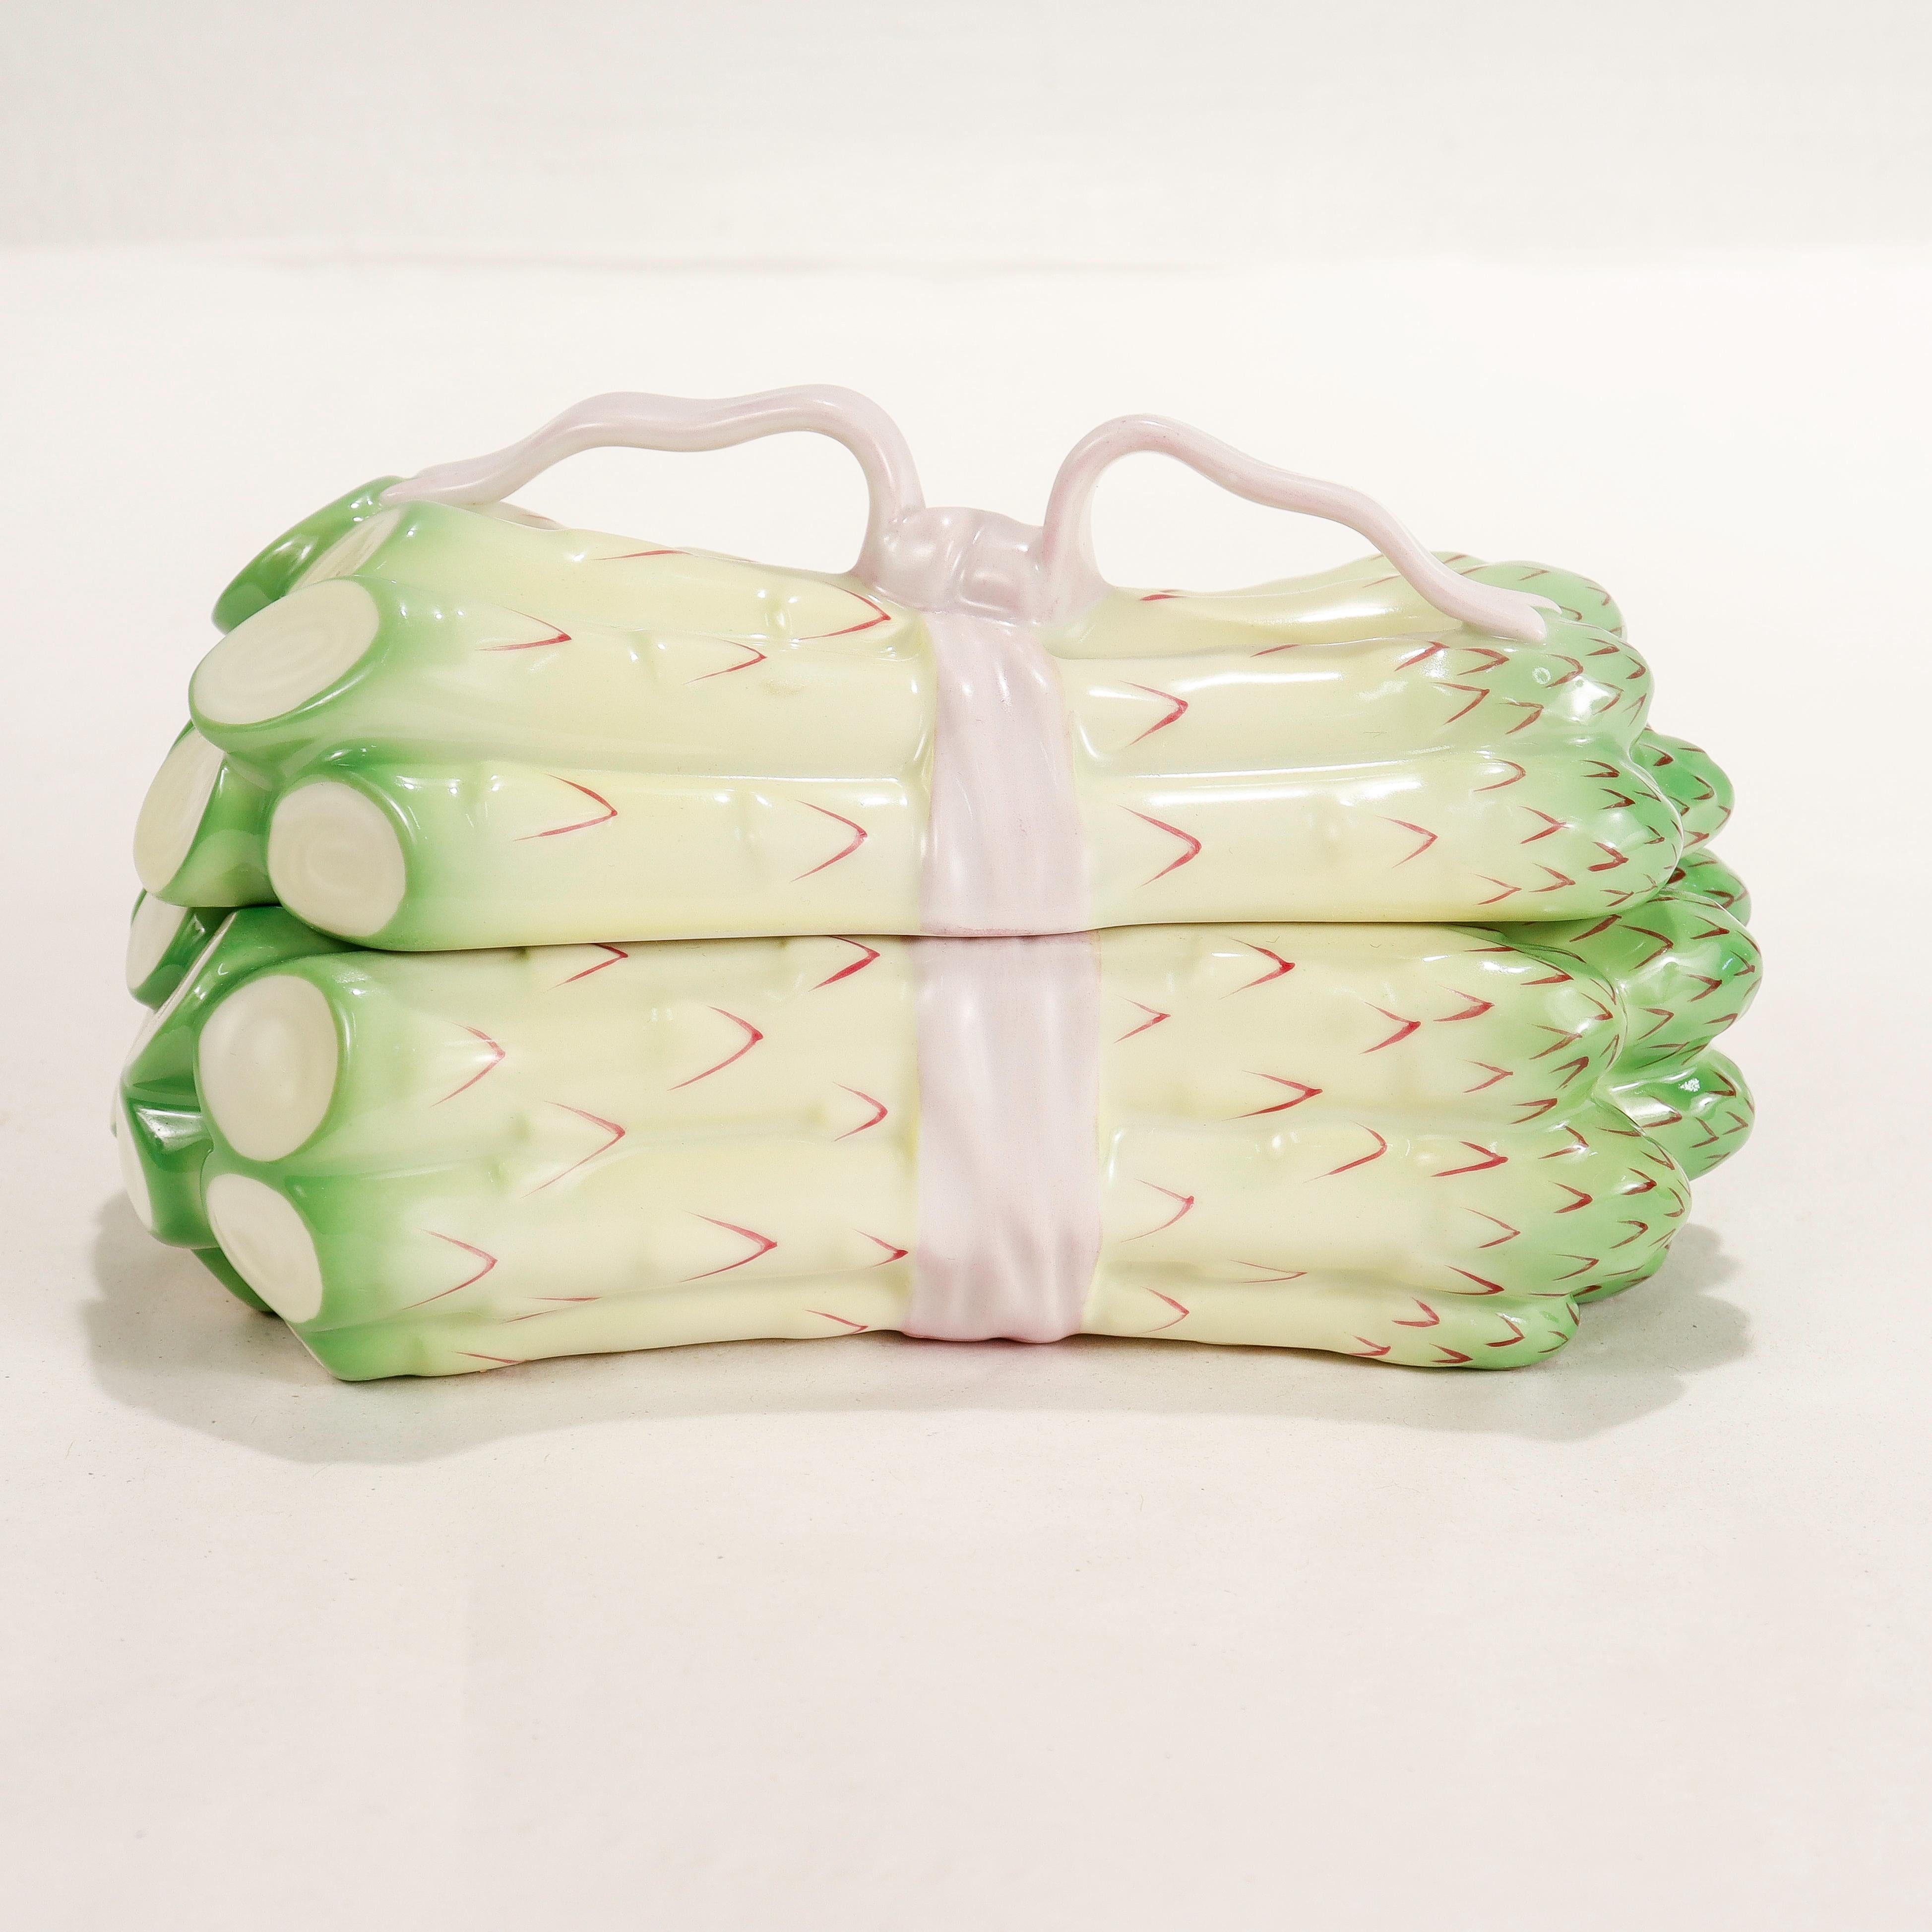 A fine figural porcelain covered box.

By Herend.

In the form of a bundle of asparagus tied together with a pink ribbon.

Model No. 6070/C.

Simply a wonderful piece of Herend porcelain!

Date:
20th Century

Overall Condition:
It is